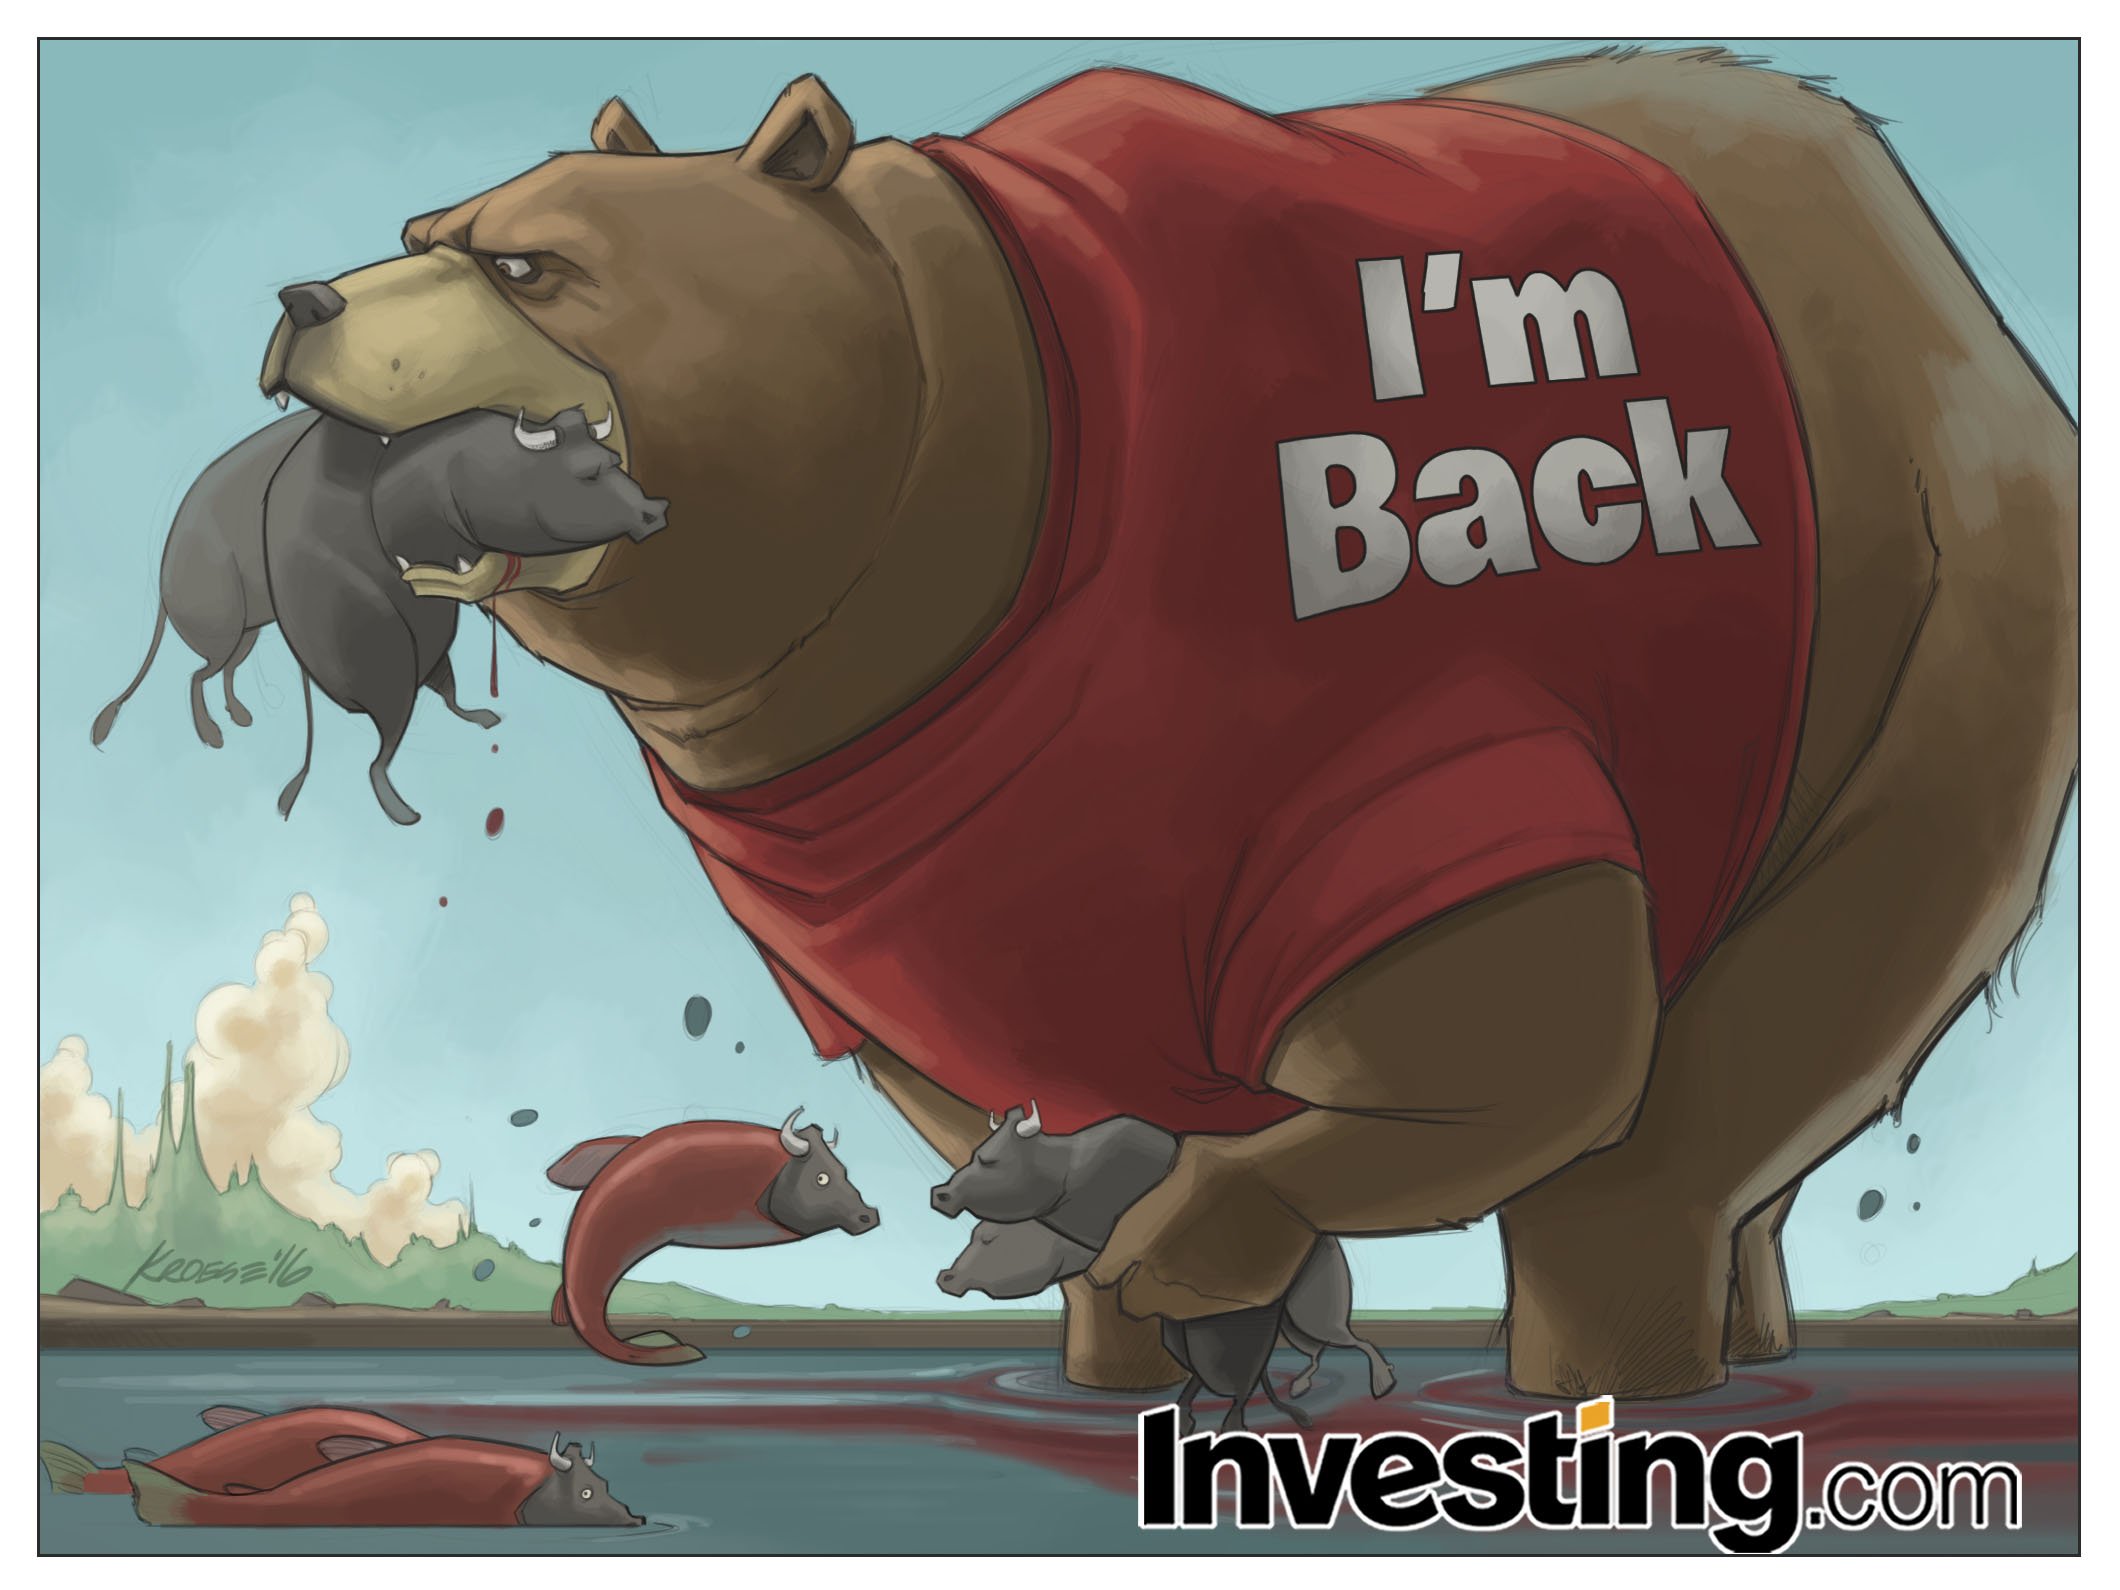 Bear market investing tax lien investing njuifile